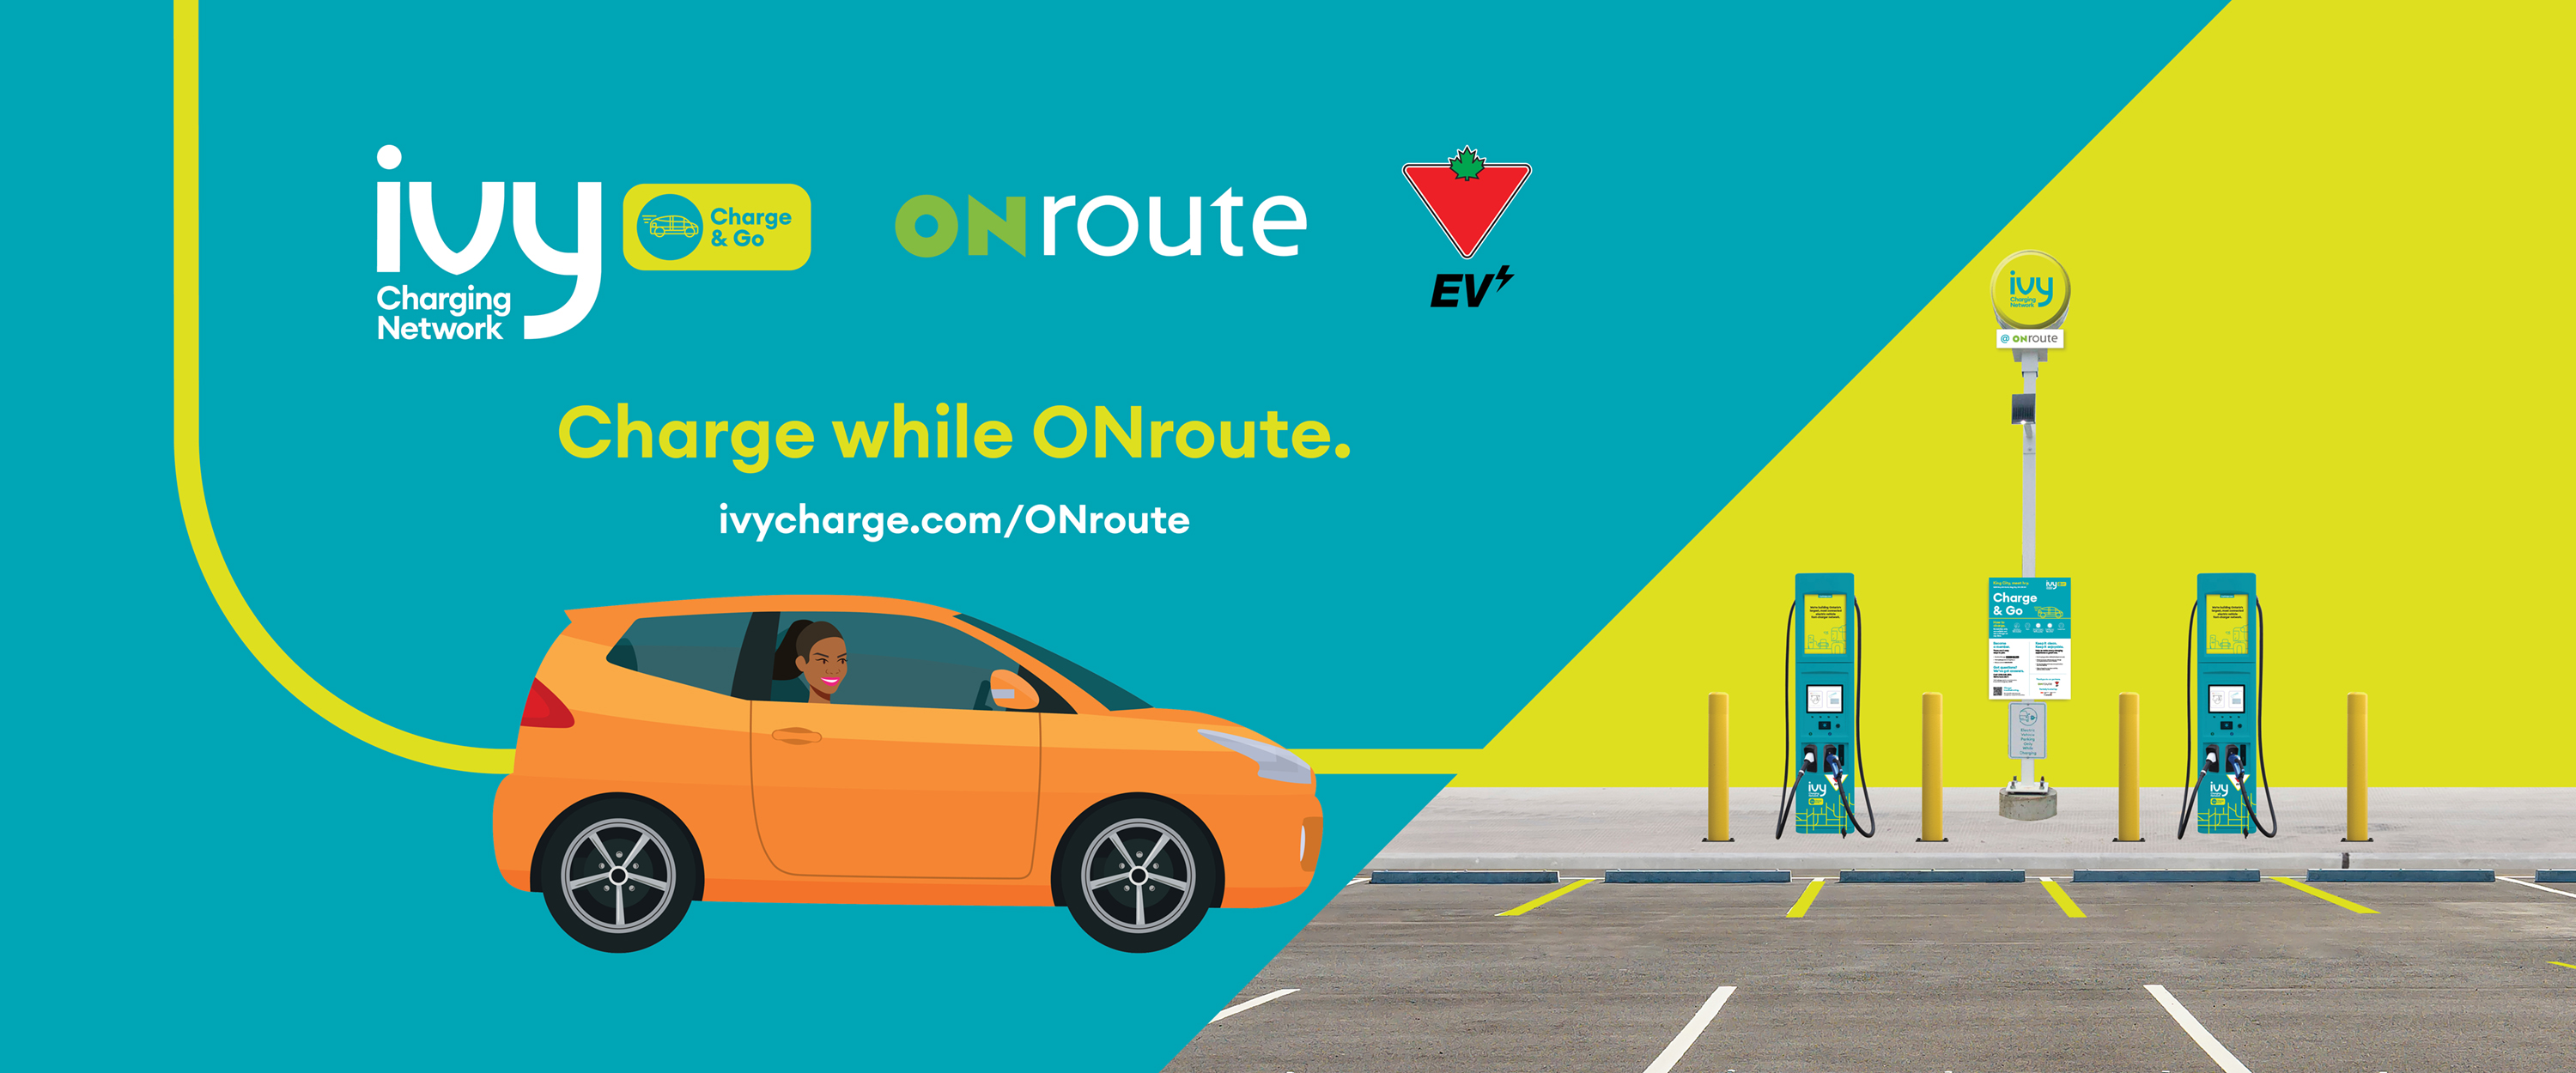 Ivy, ONroute and Canadian Tire put a big charge into road trips